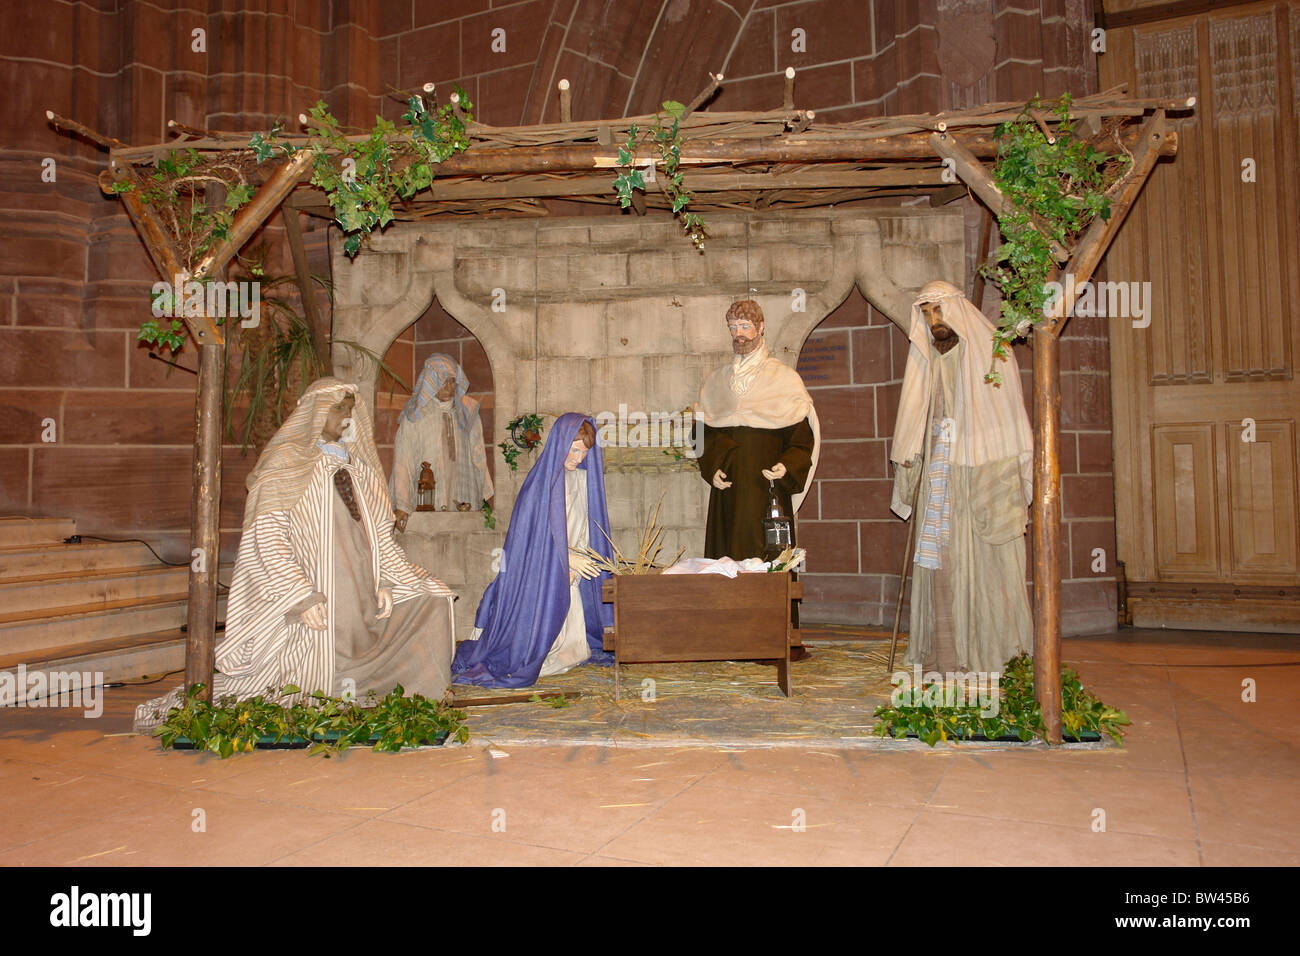 The Nativity (Crib), The Liverpool Anglican Cathedral, Liverpool, Merseyside, Northwest England, United Kingdom Stock Photo